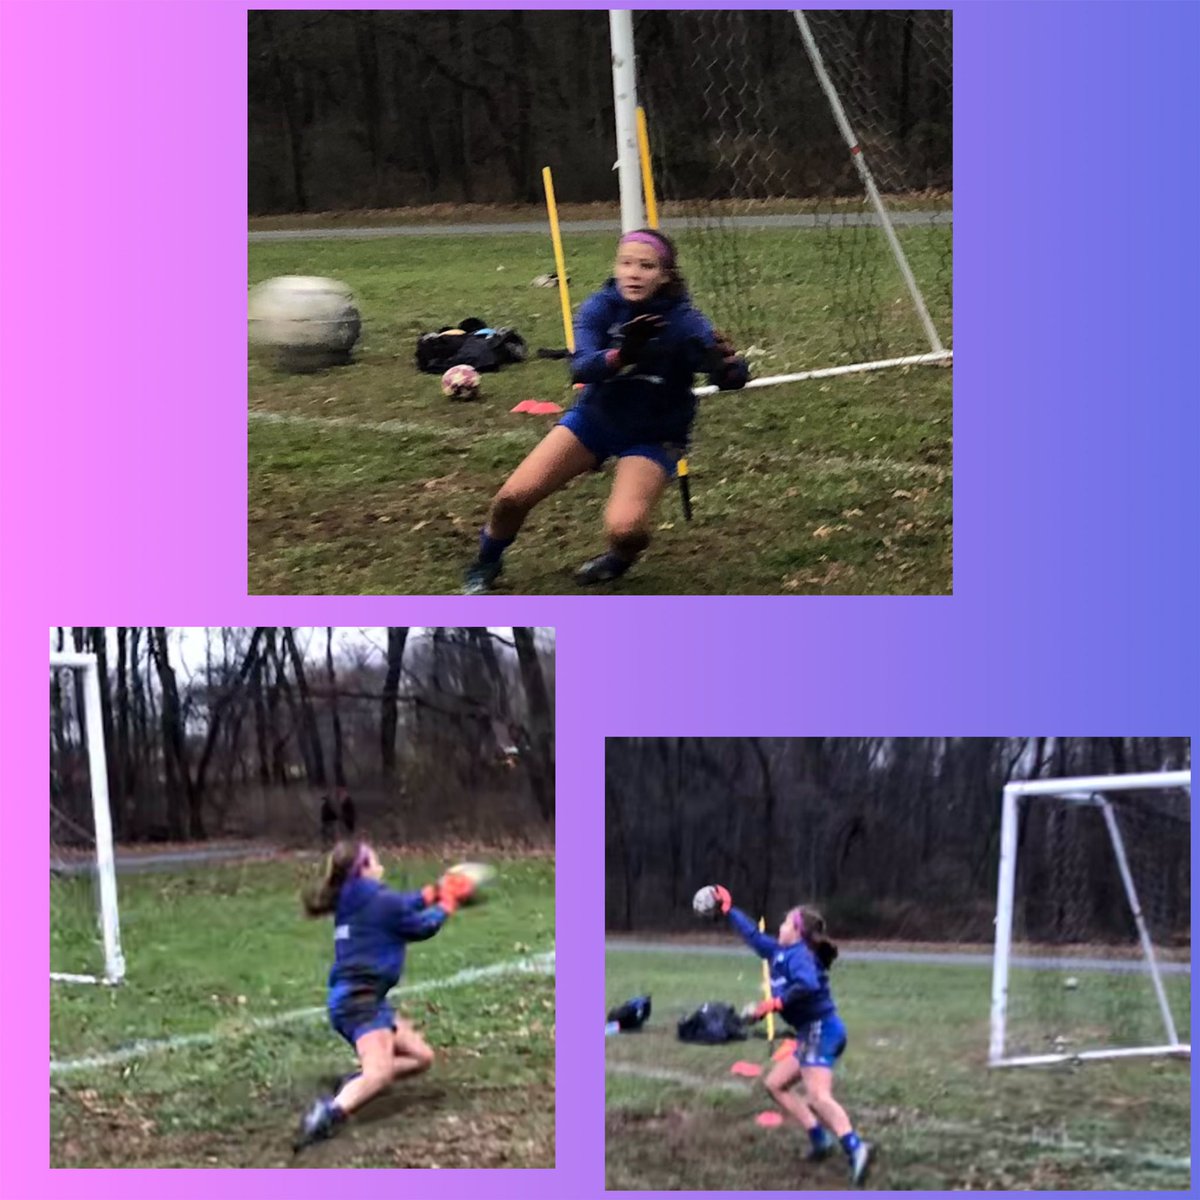 Great ⚽️👐🥅with young talented goalkeeper!! #soccer #goalkeeper #cuddysoccer #soccergirls #womensgoalkeeper #girlssoccer #girlsgoalkeepers #youthsoccer #goalkeepertraining #goalkeeperpractice